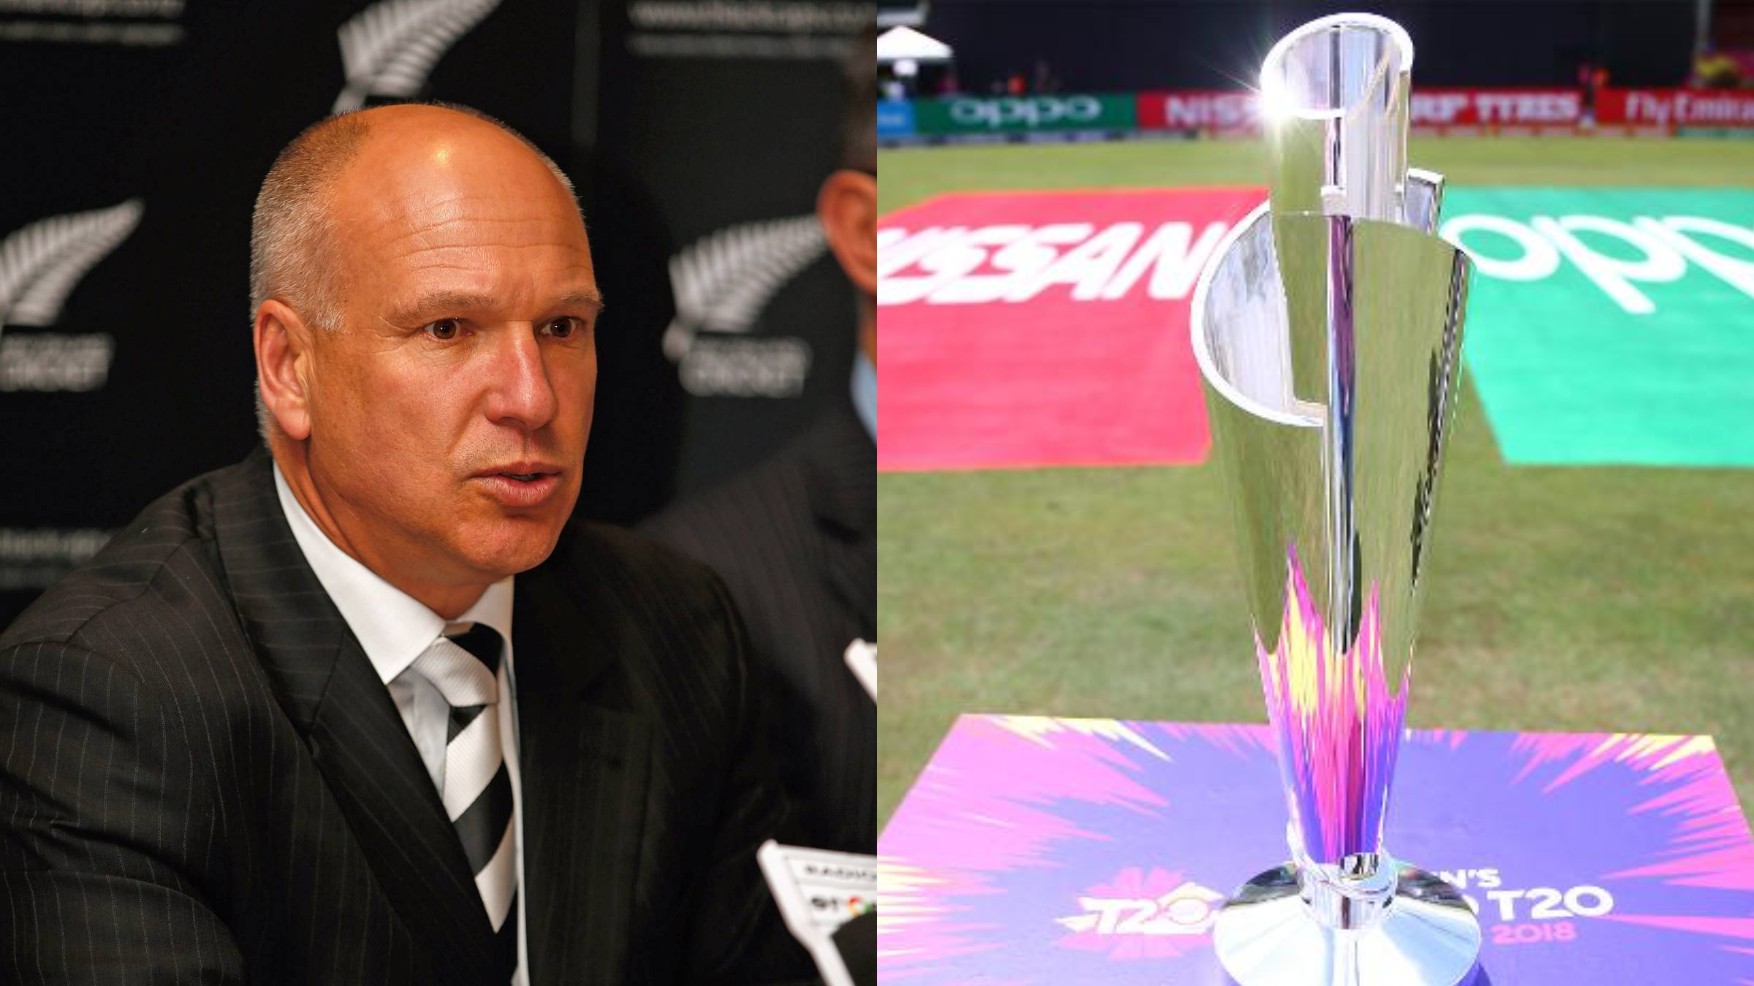 Not deciding on rescheduling T20 World Cup before July, says NZC chief David White